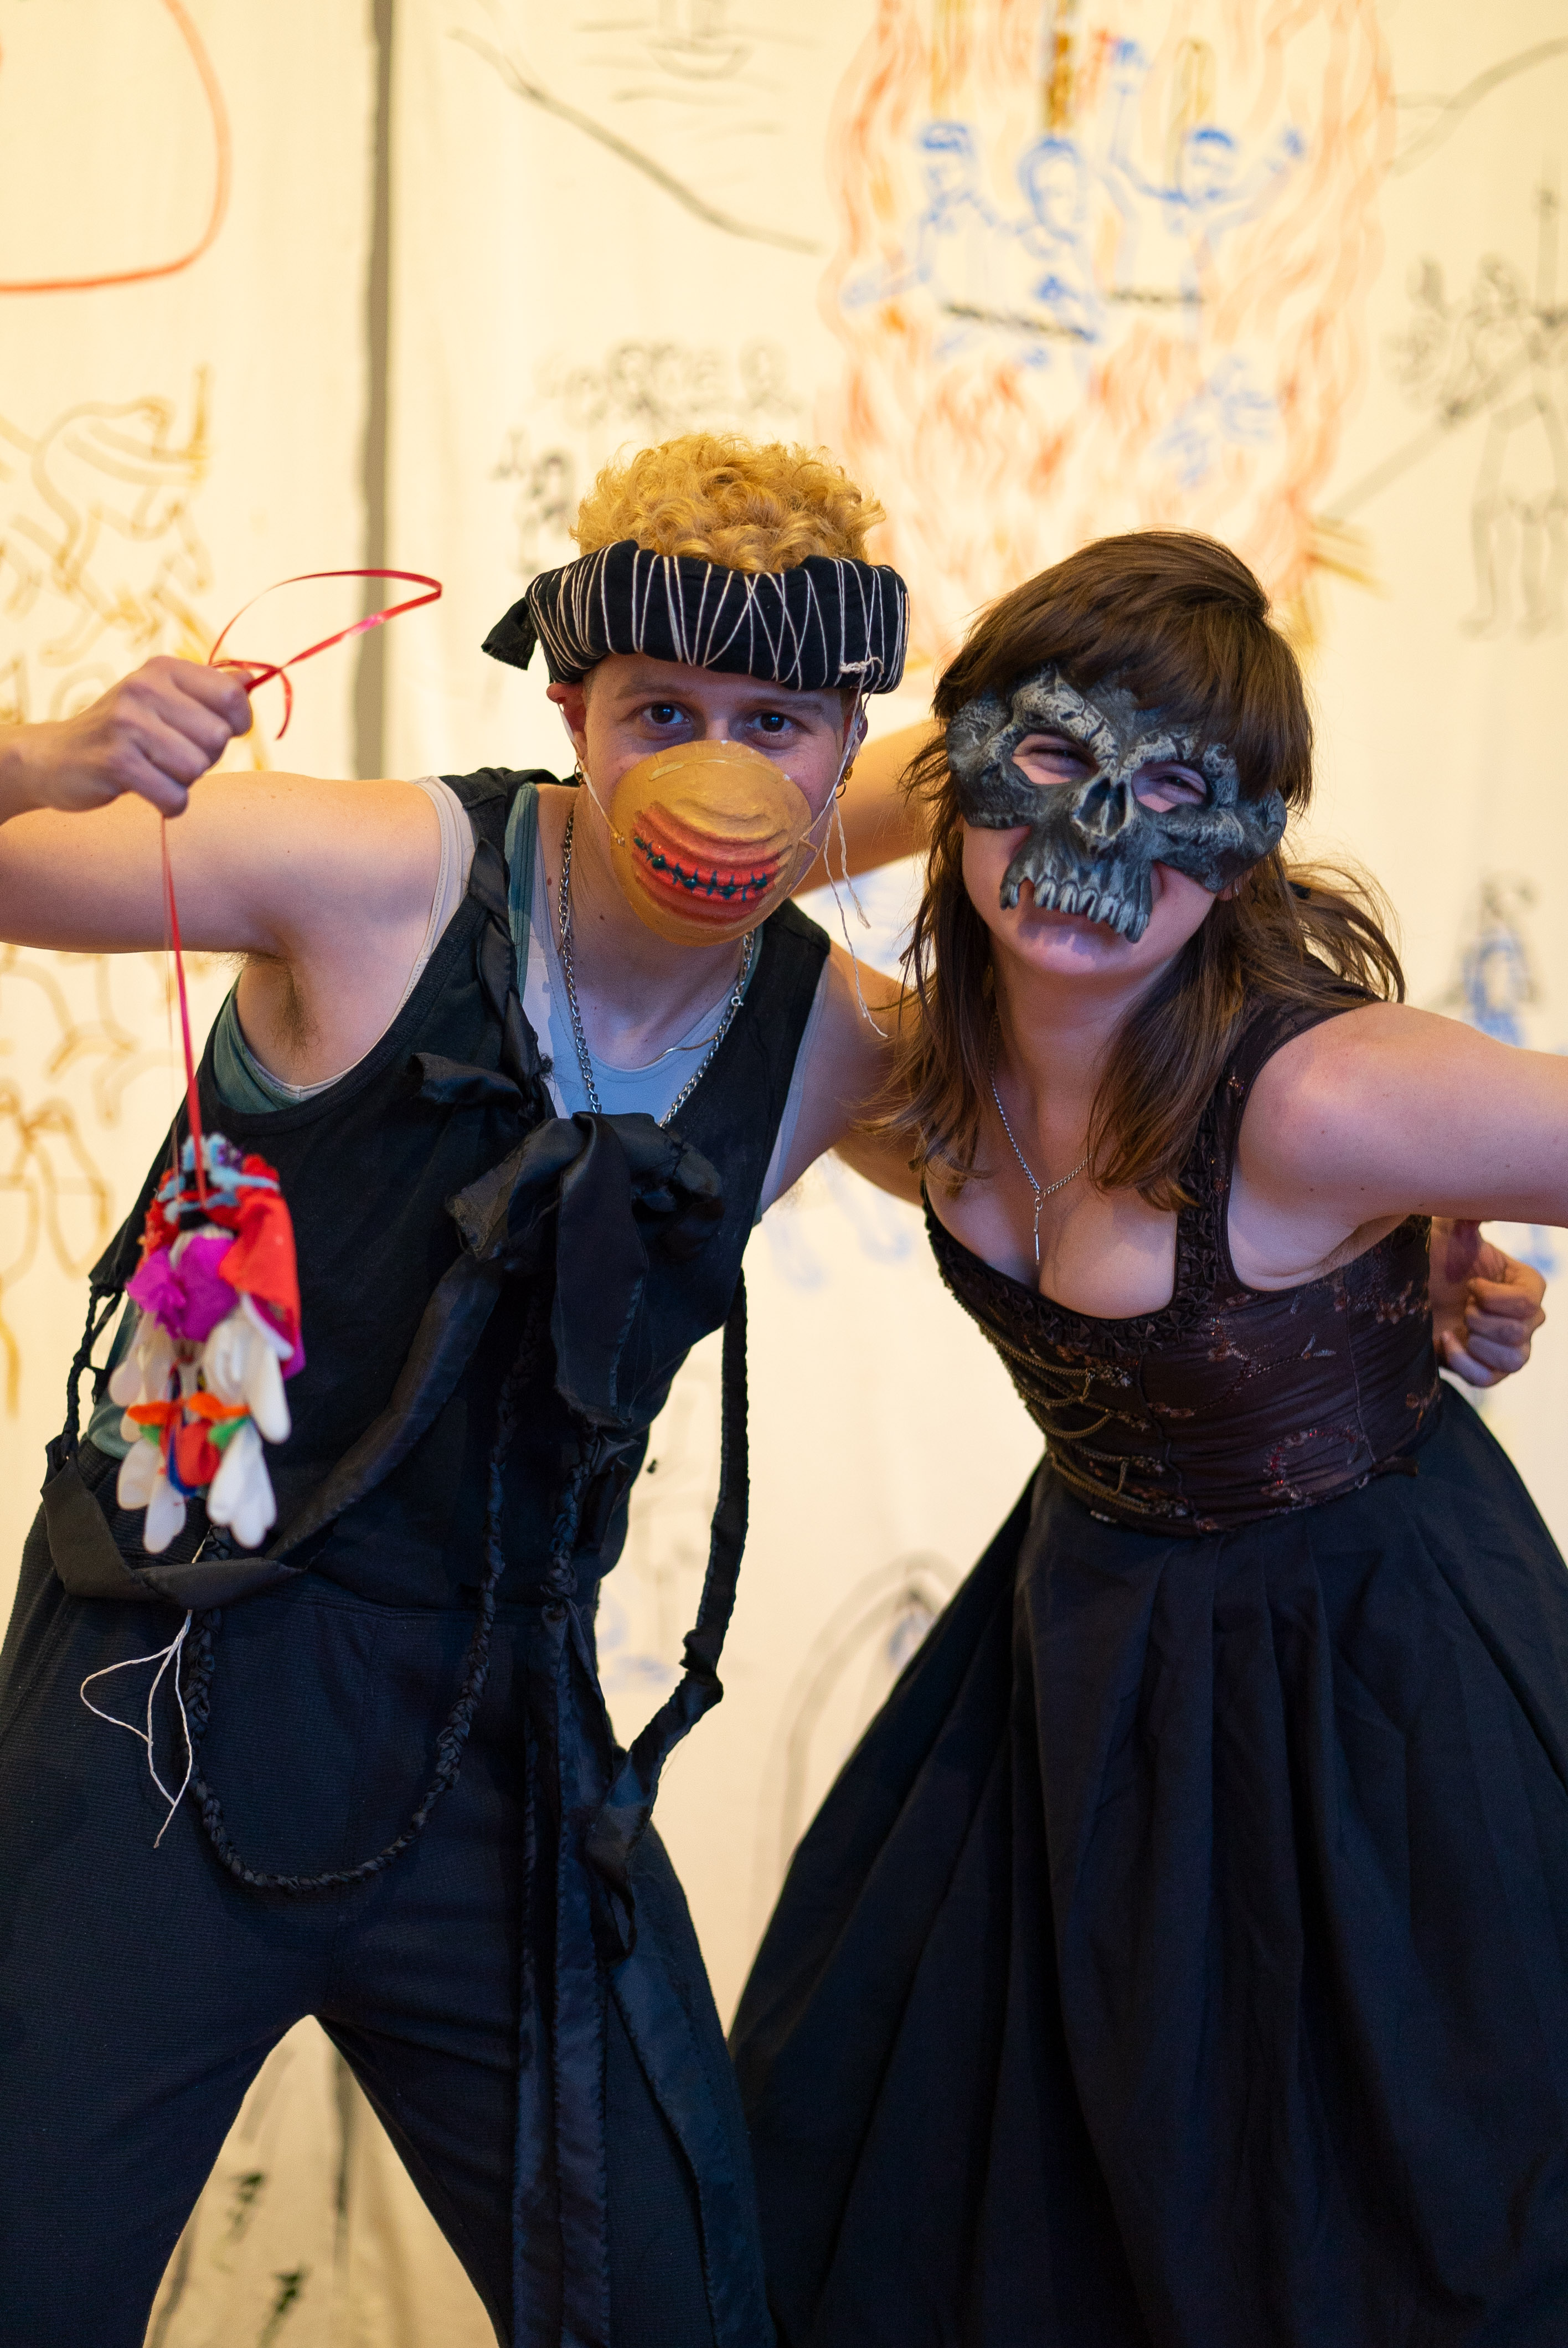 The photo shows two people in costumes posing on a stage. They have one arm around each other. The person on the left wears a patterned fabric ring as headgear, a painted protective mask that looks like a sewn up mouth, a black muscle shirt and black trousers. In their right hand they hold a self-made medallion in the air. The right person is wearing a skull mask and a dress that accentuates their cleavage. In the background hang banners made of antique white fabric with colourful medieval figurative paintings.